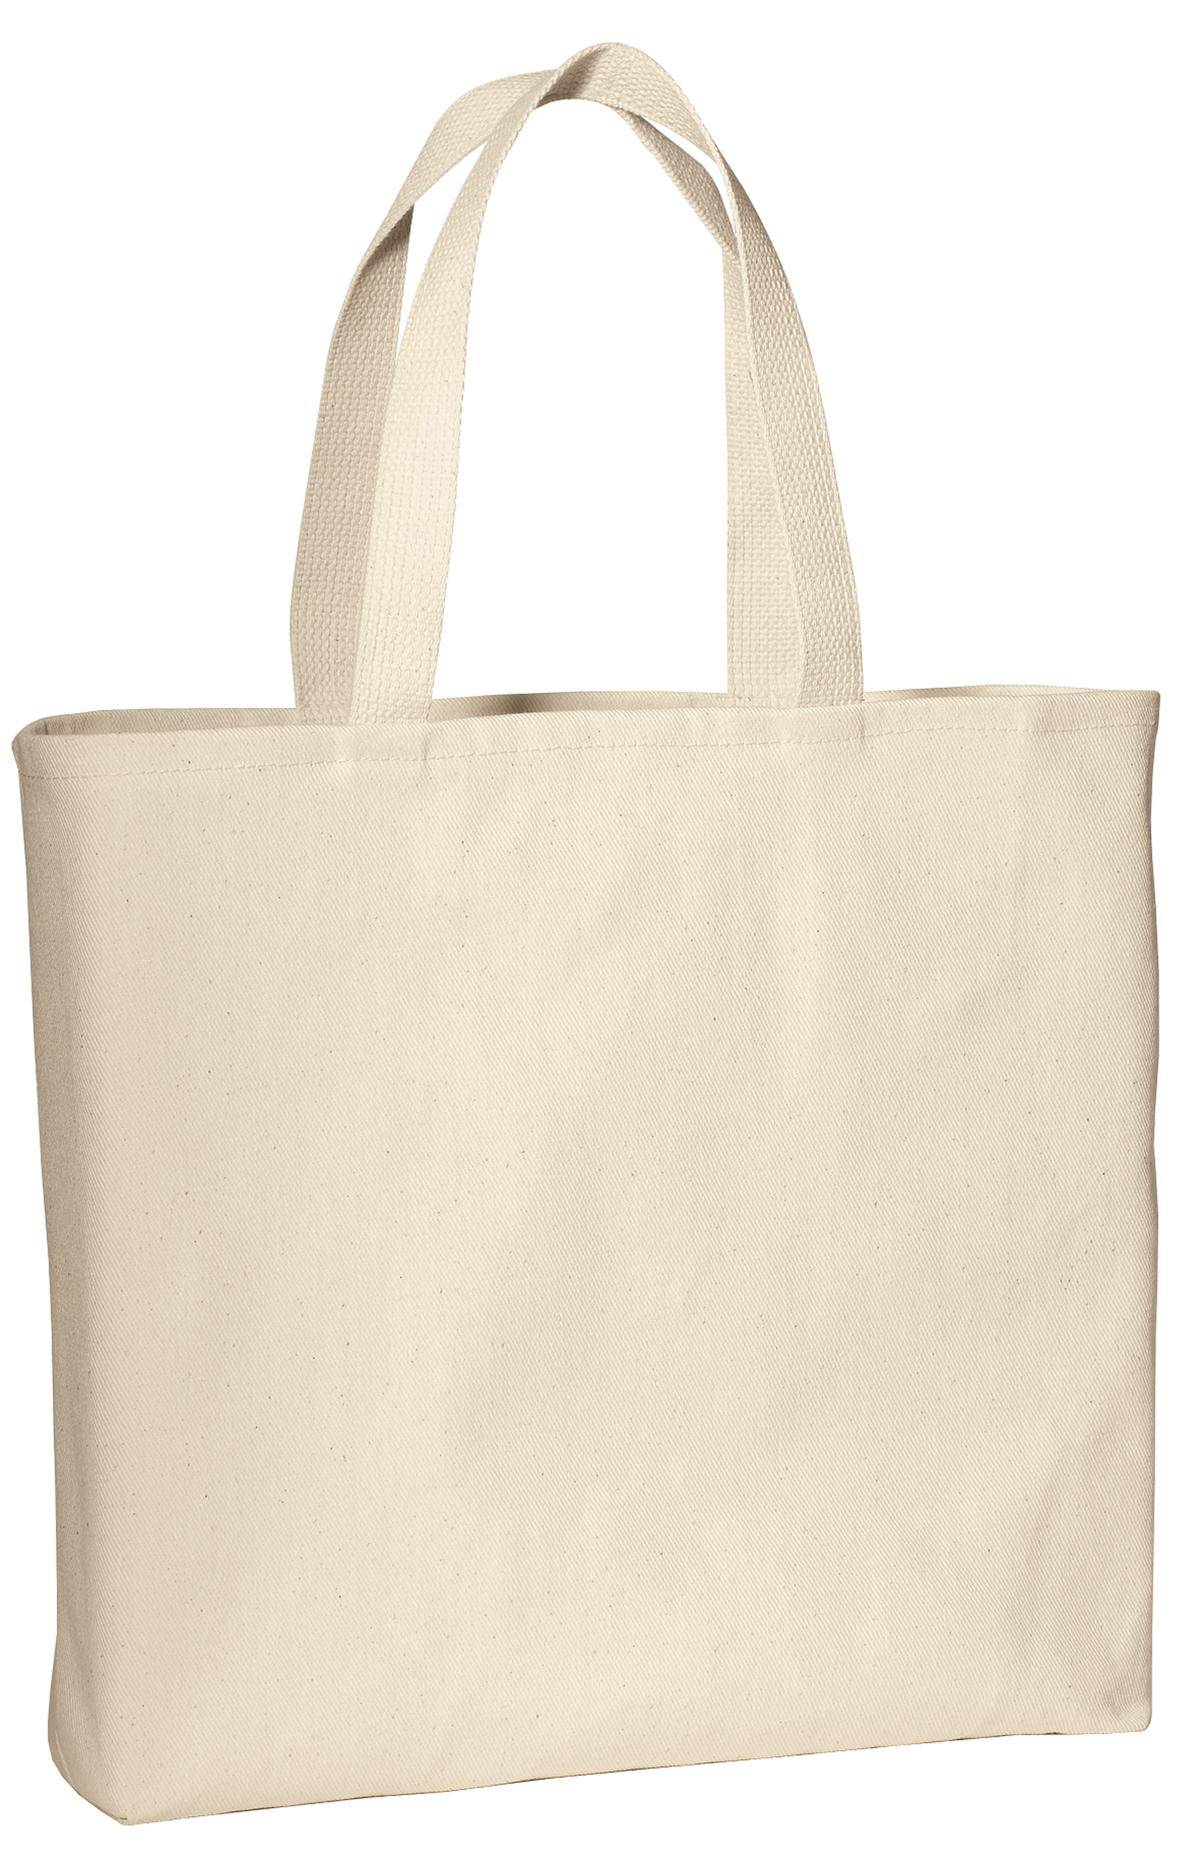 Port Authority Convention Tote - B050